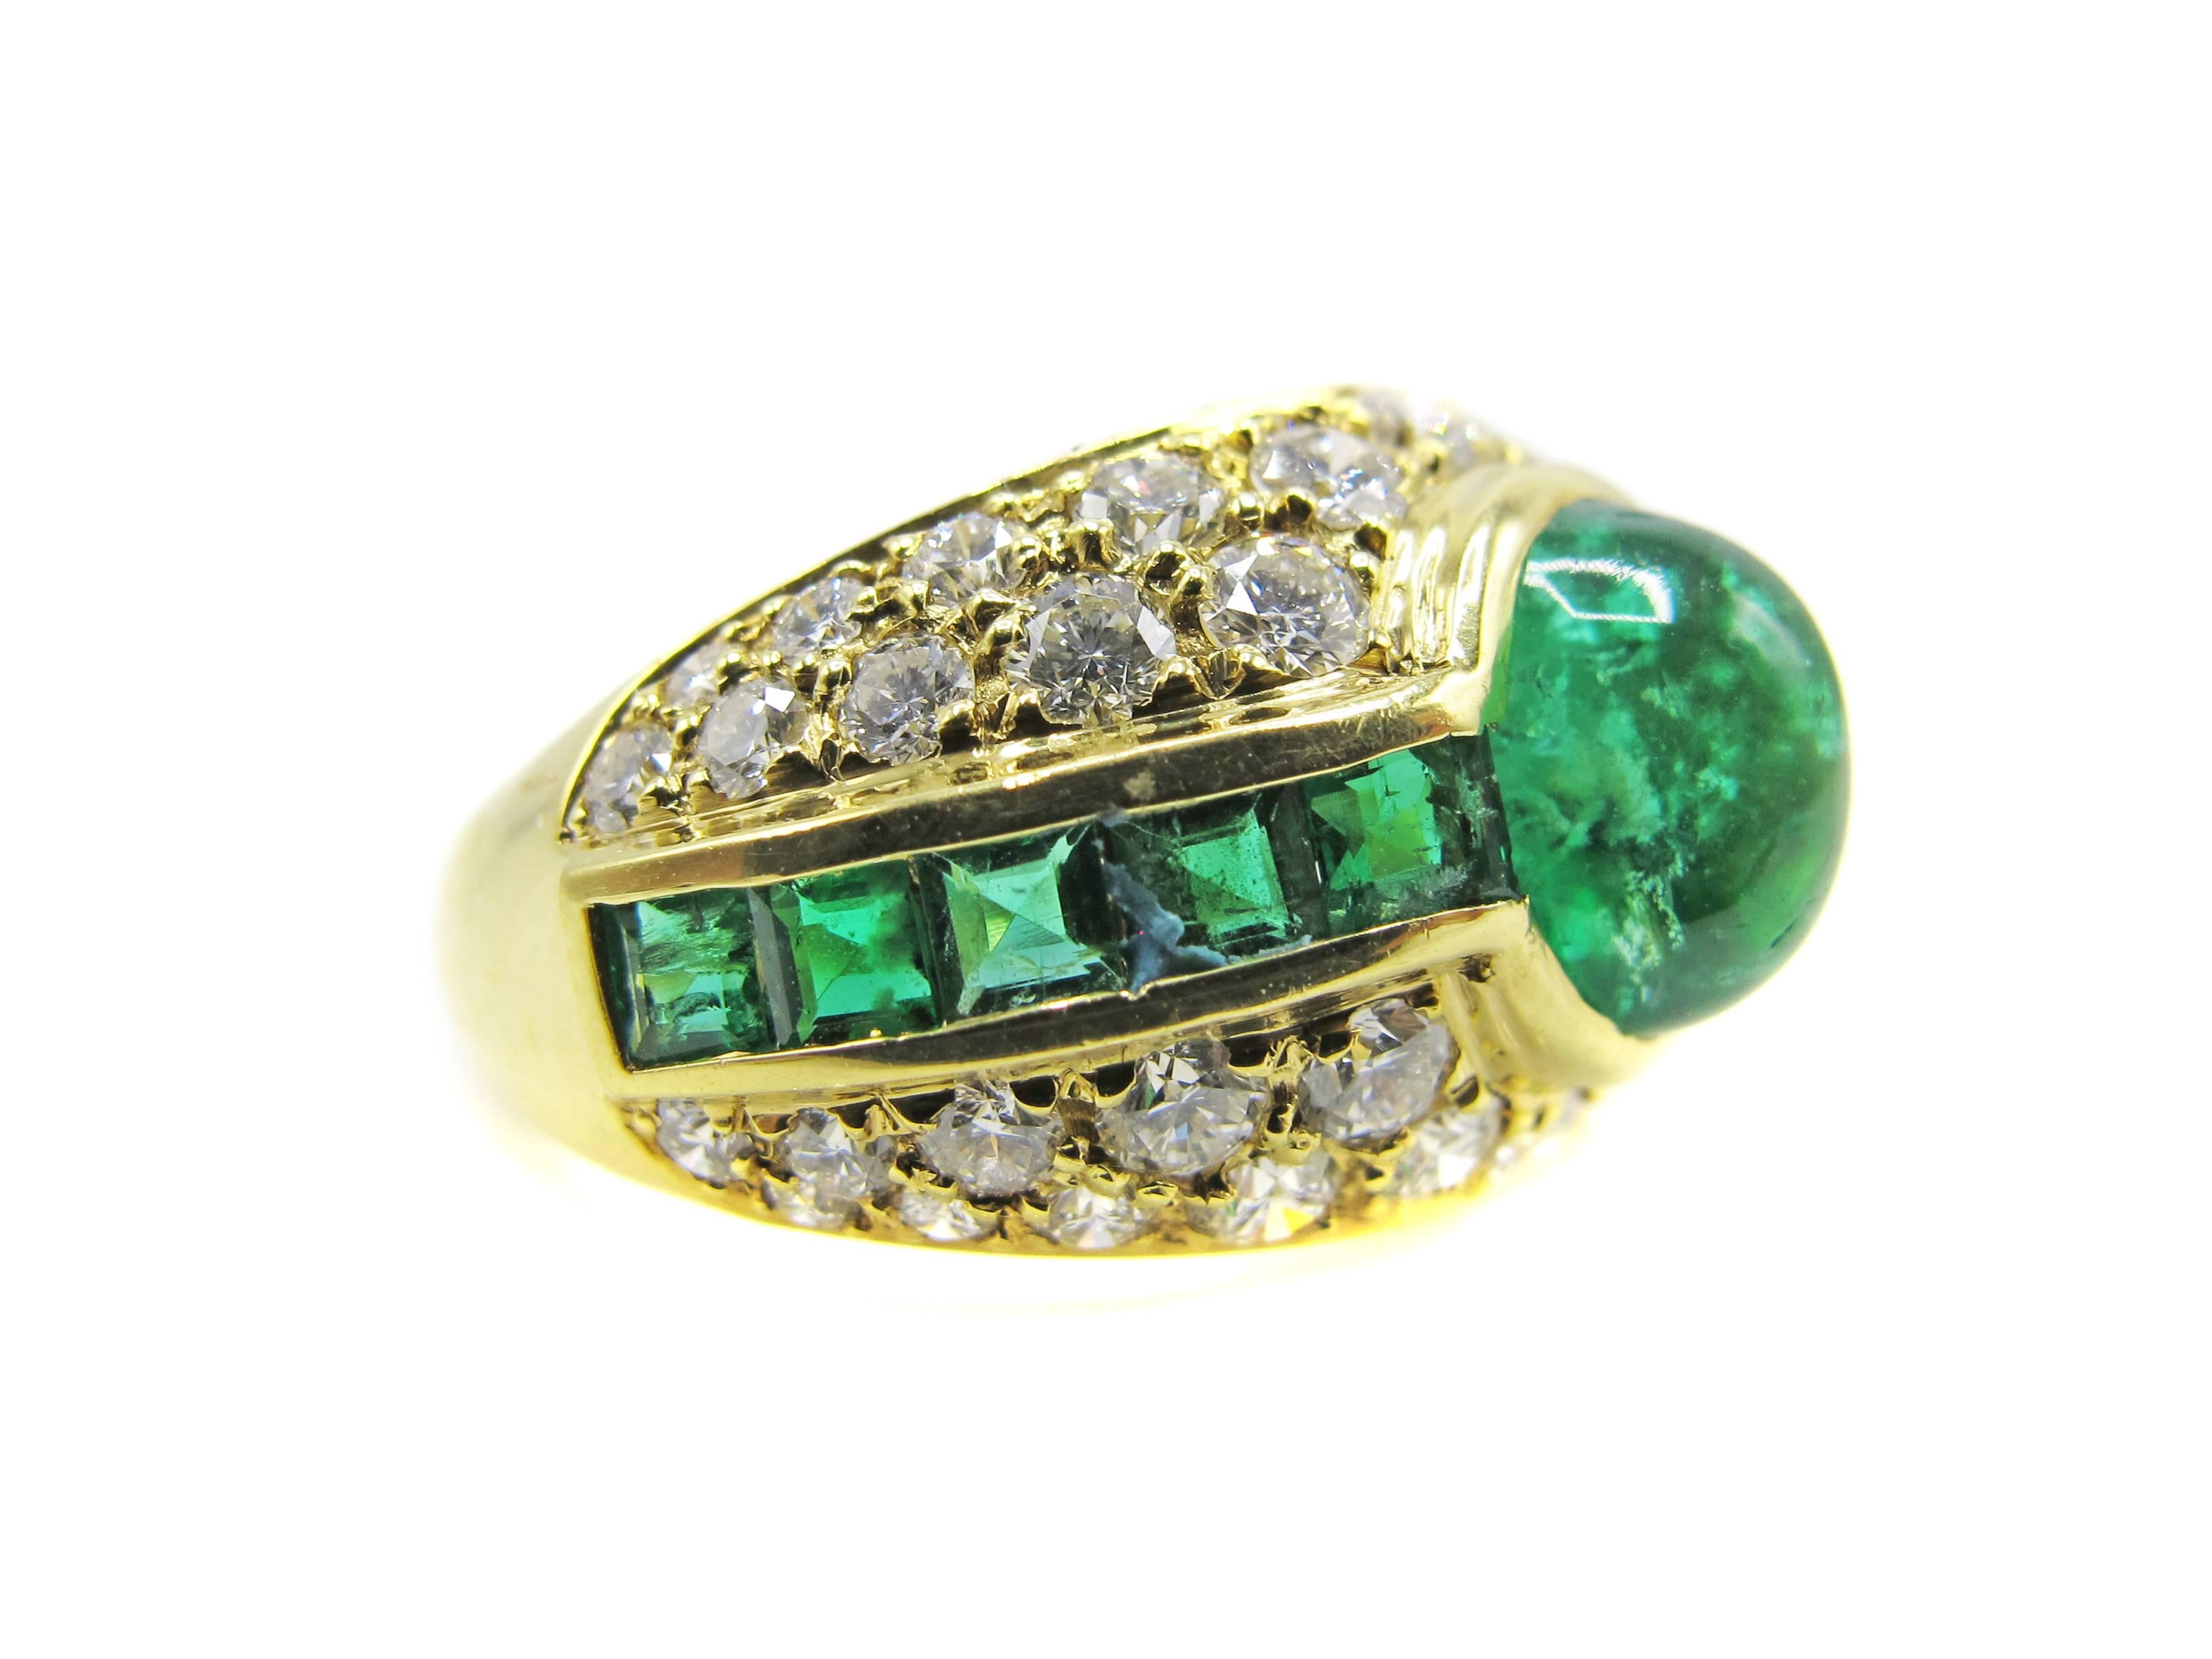 
Chic 1980s 18 Karat yellow gold diamond ring, centrally set with one forest green cabochon emerald weighing approximately 1.85 carats. The cabochon emerald is flanked by 5 beautifully matched square cut emeralds and surrounded by 42 bright white